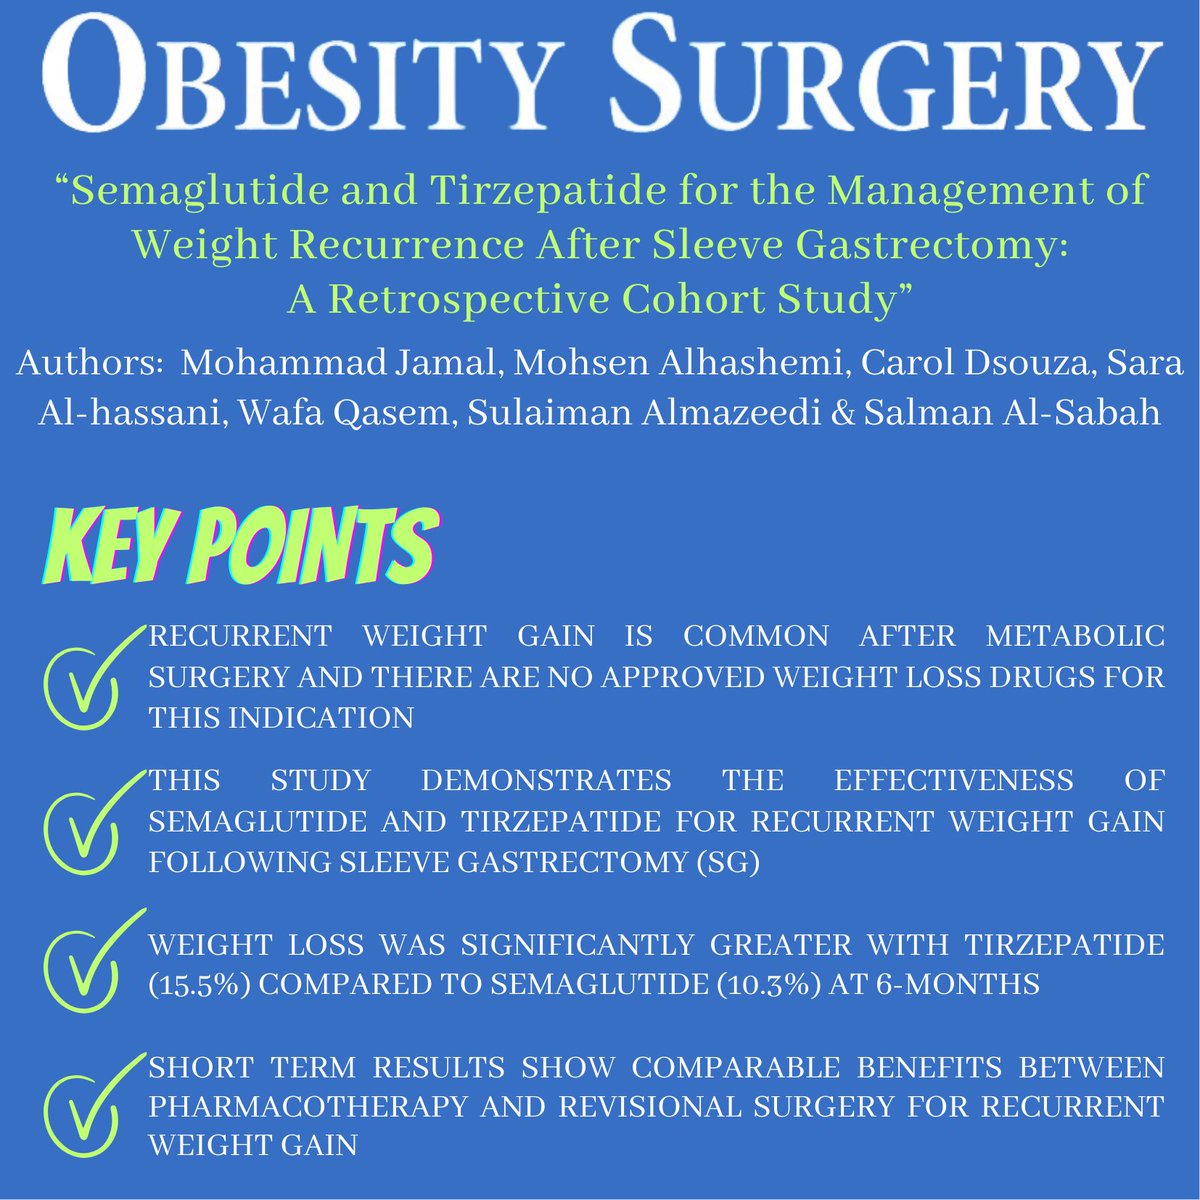 BEST PAPERS APRIL ISSUE 'Semaglutide and Tirzepatide for the Management of Weight Recurrence After Sleeve Gastrectomy: A Retrospective Cohort Study' DOI: doi.org/10.1007/s11695… FREE DOWNLOAD: rdcu.be/dFcyq